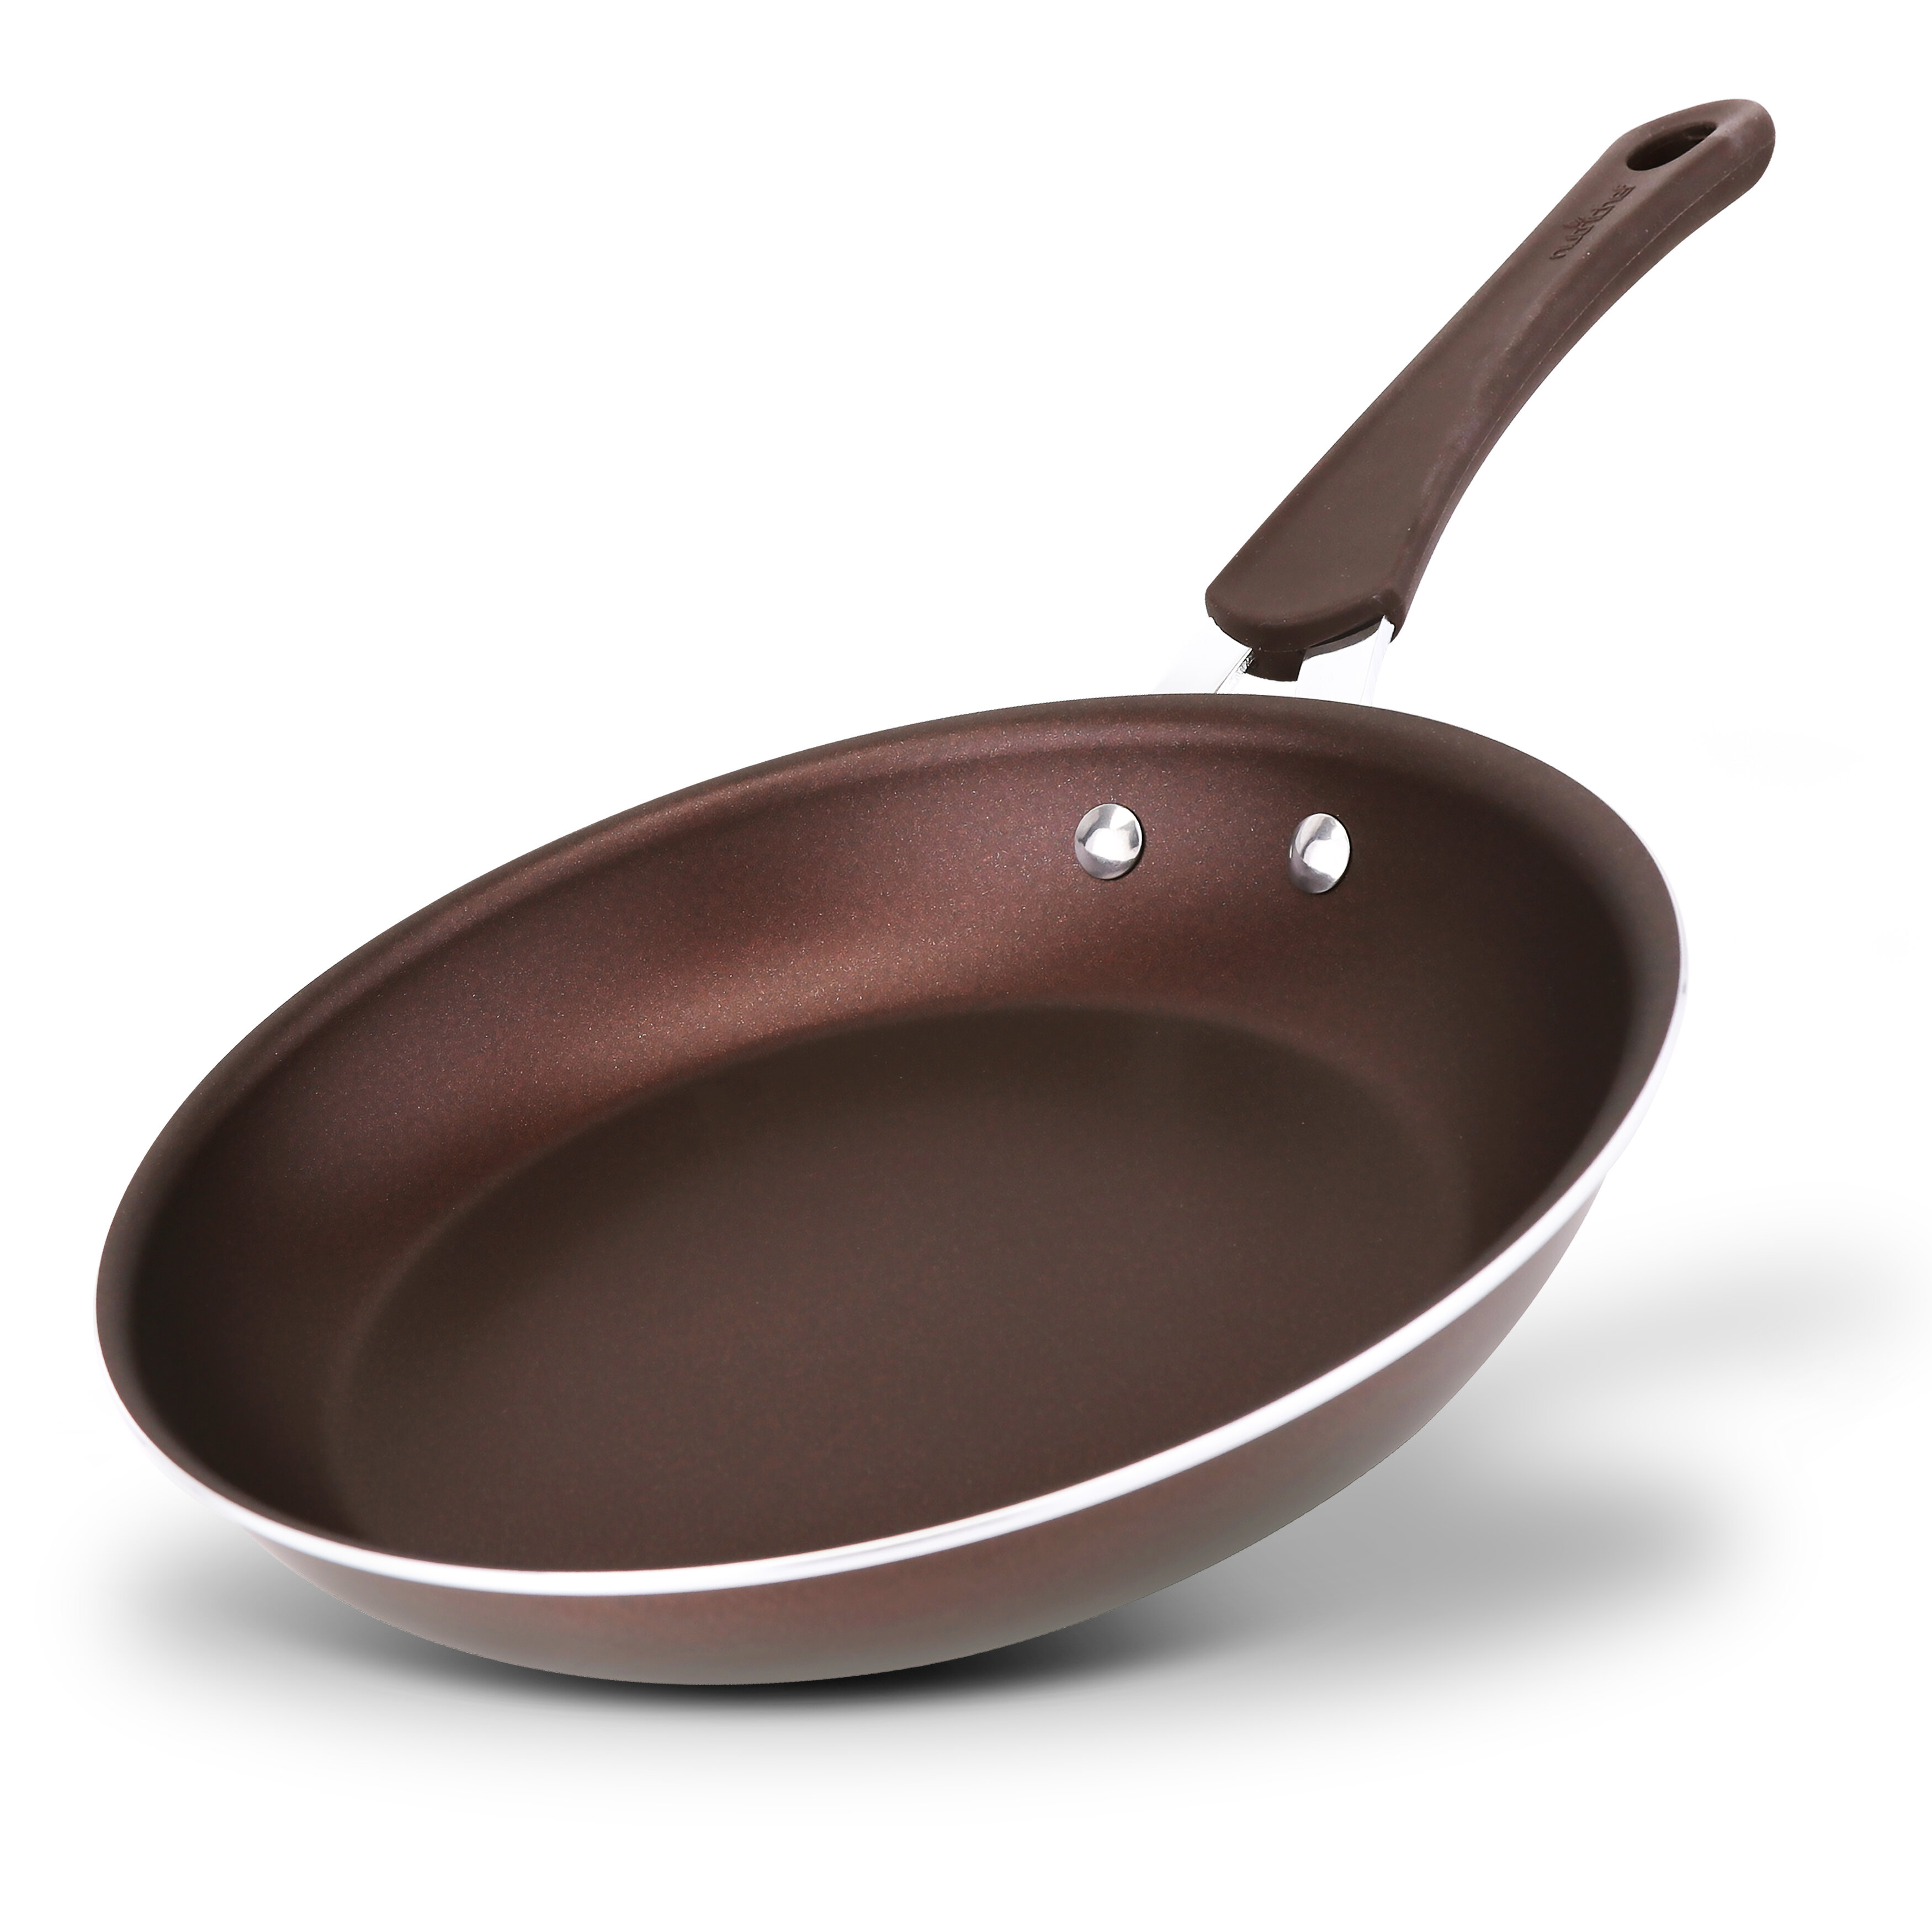 NutriChef 14 Fry Pan With Lid - Extra Large Skillet Nonstick